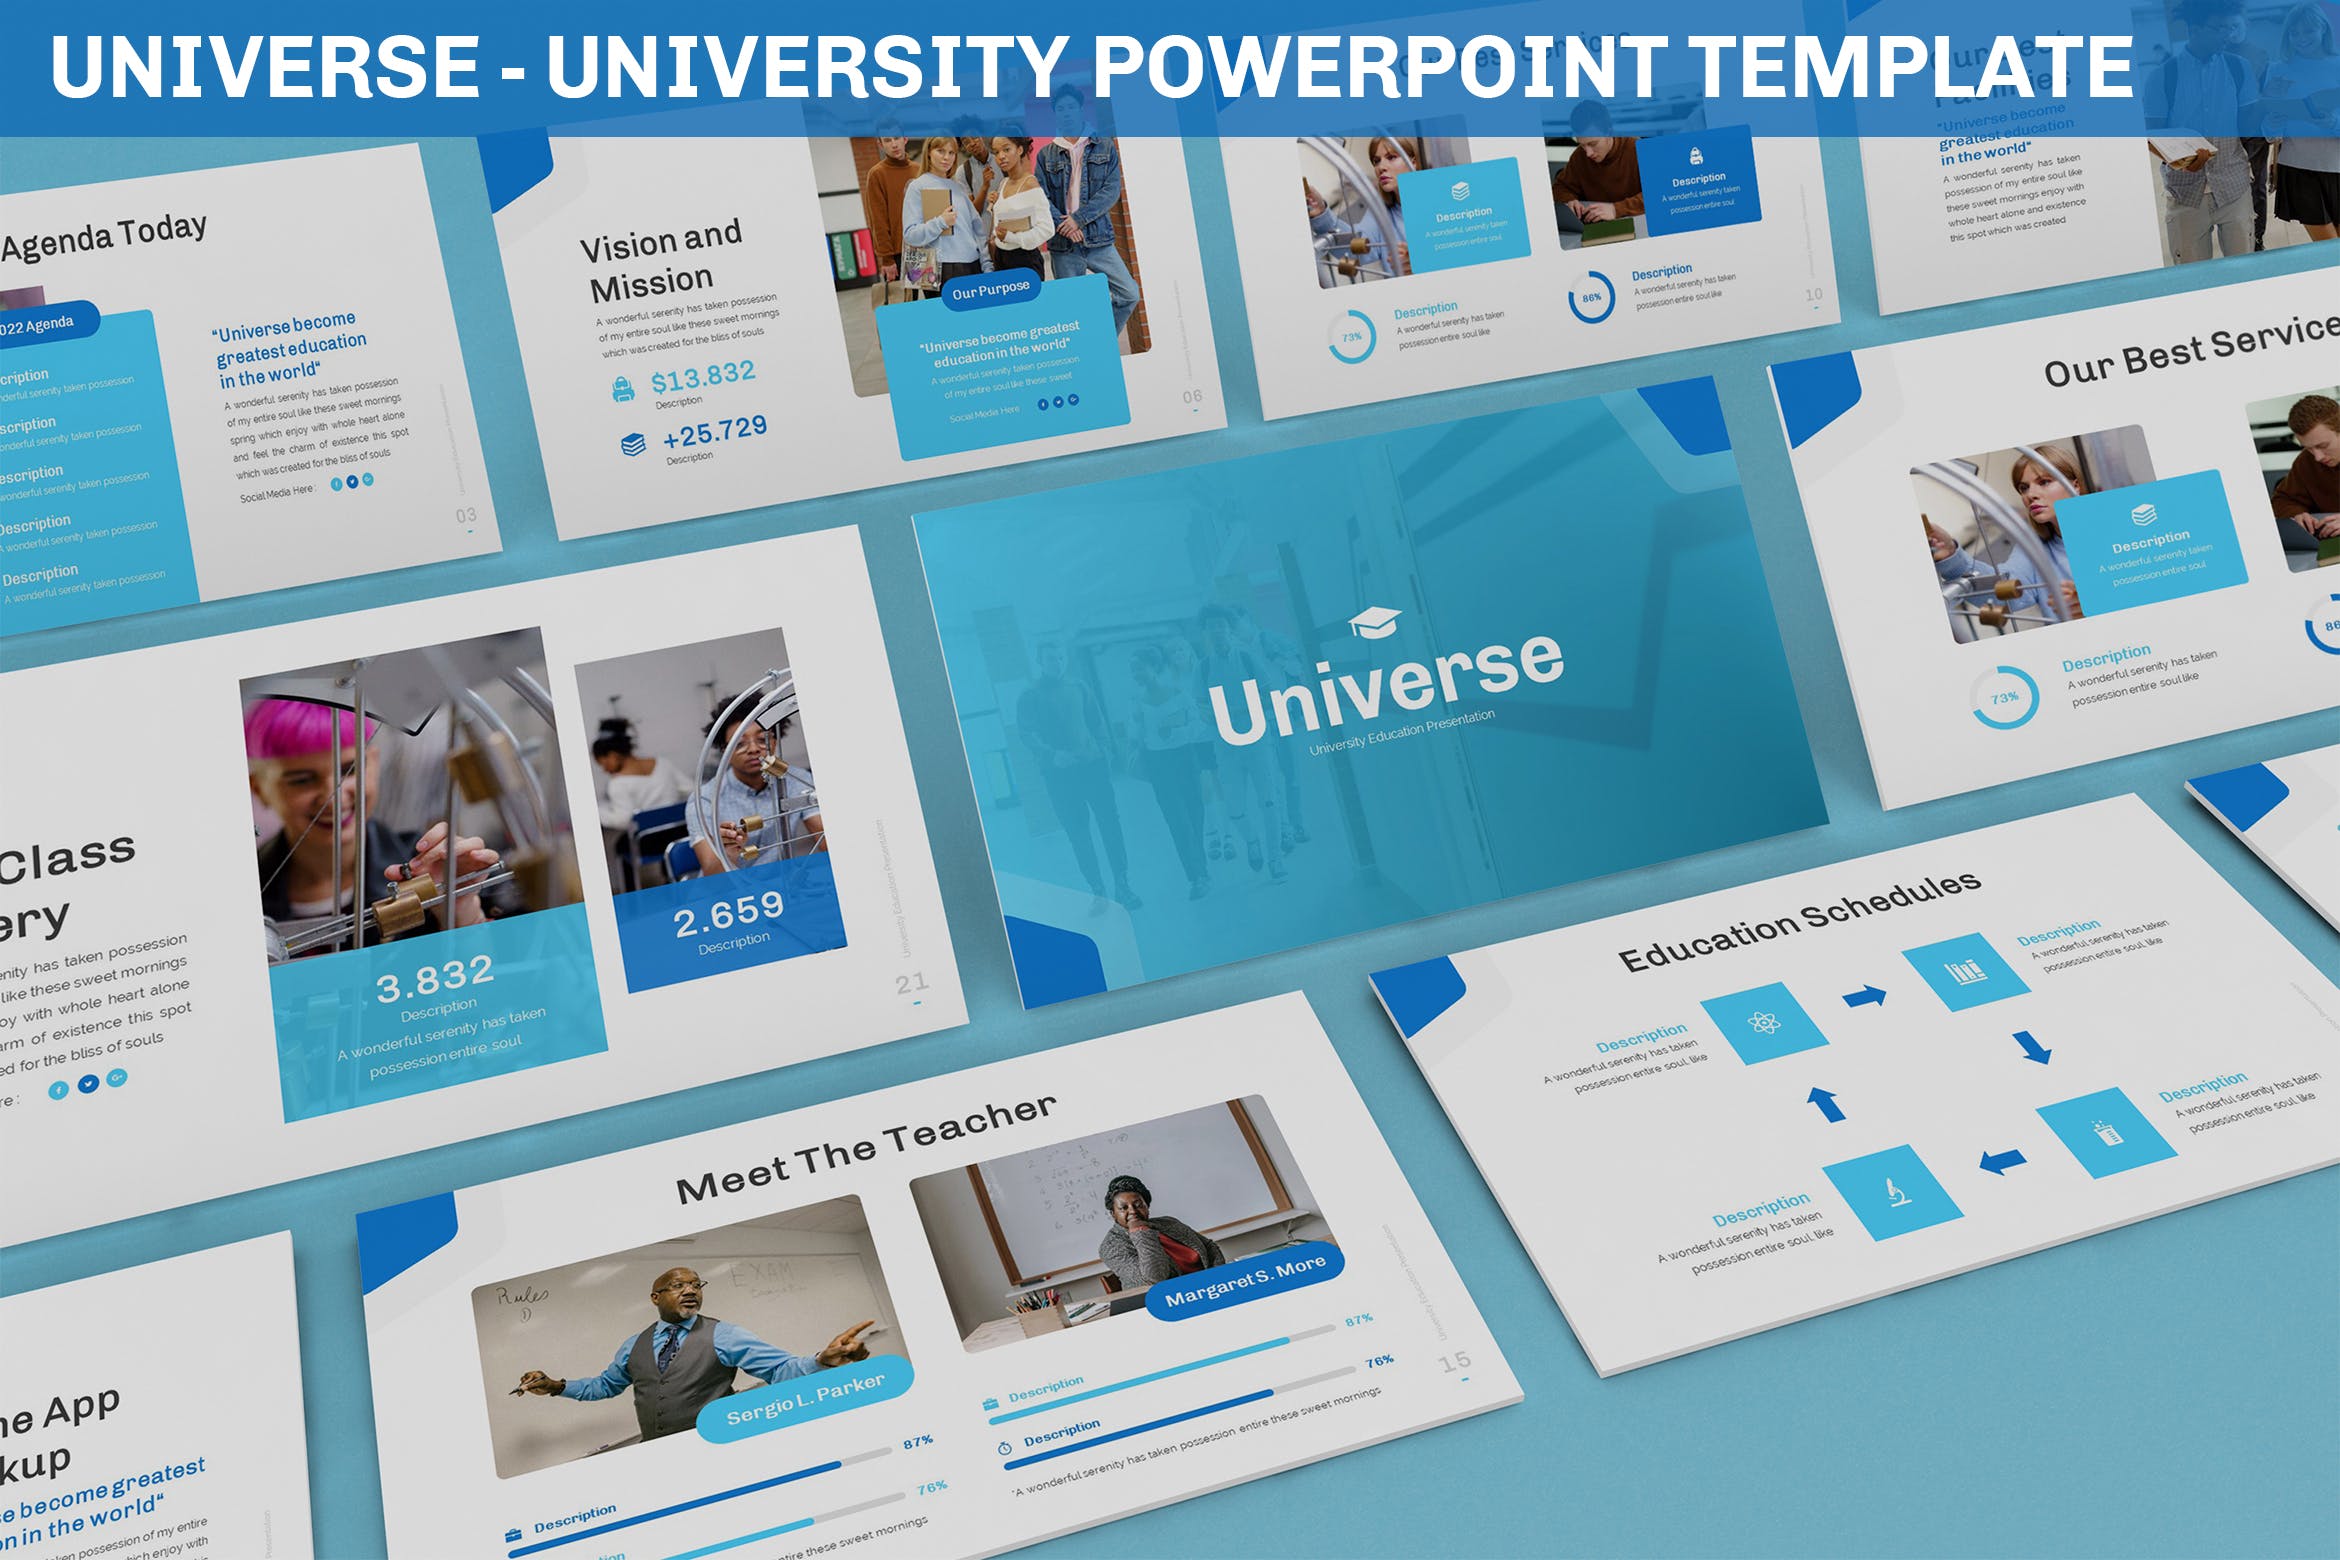 Cover image of Universe University Powerpoint Template.